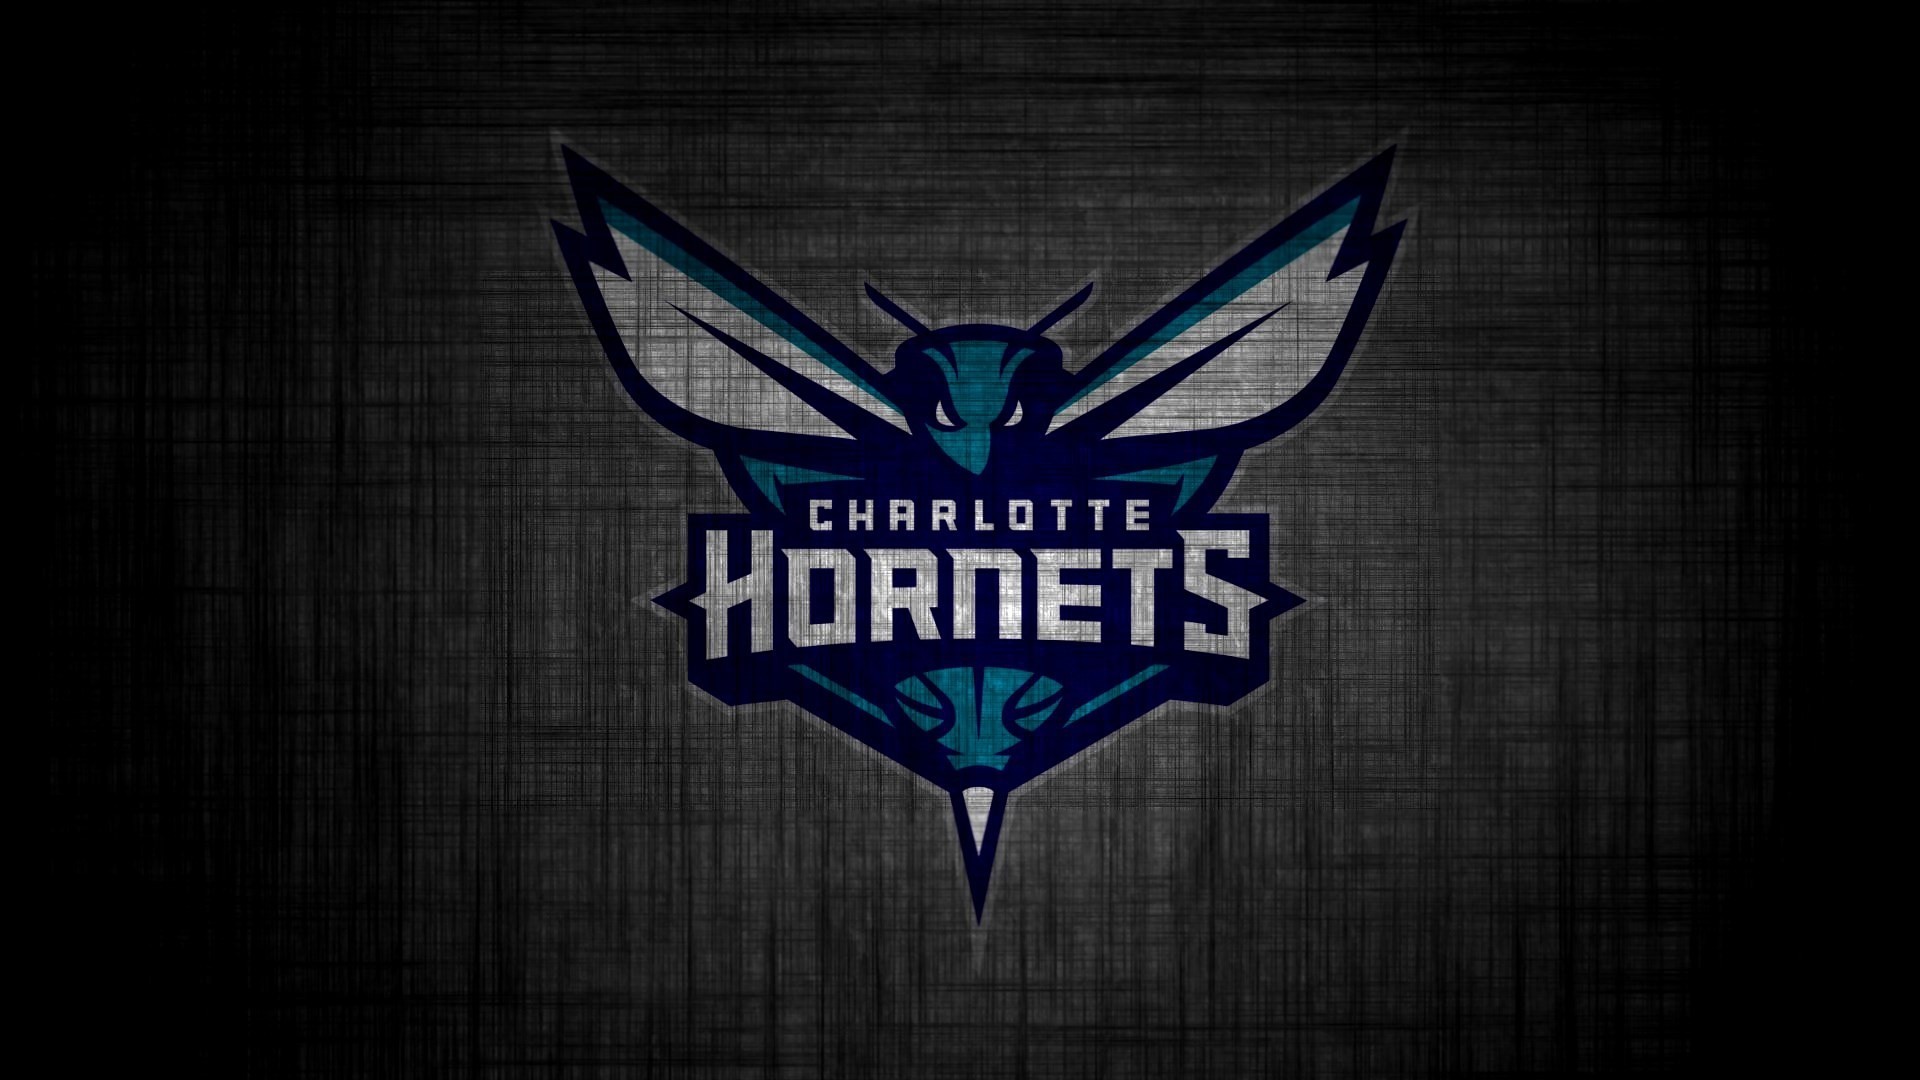 1920x1080 Charlotte Hornets For Desktop Wallpaper with high-resolution   pixel. You can use this